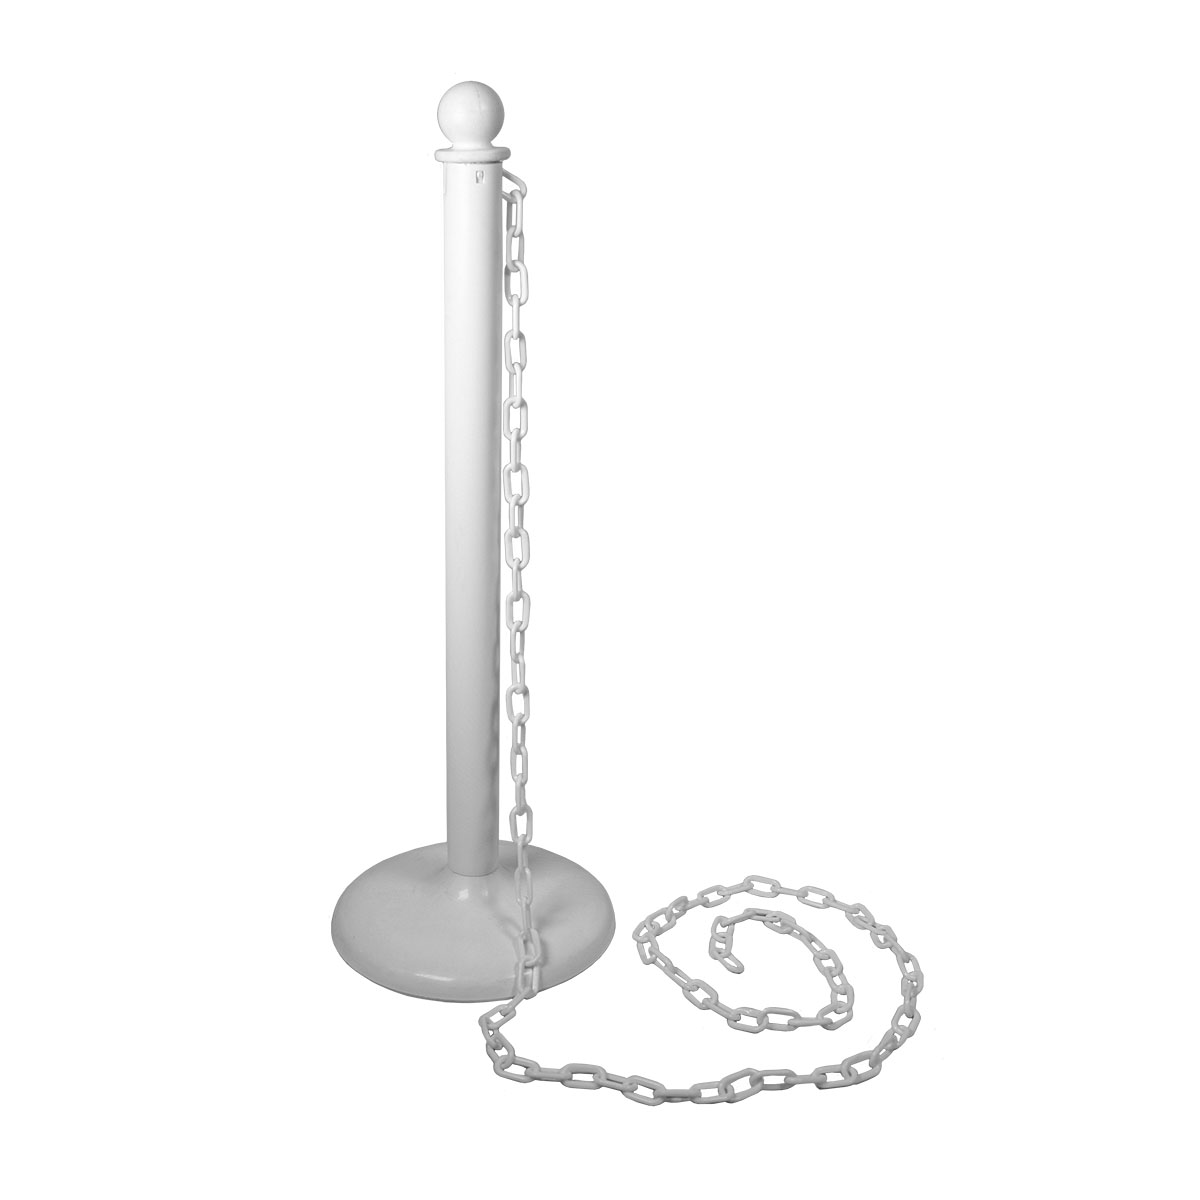 Stanchion White Plastic with 10' Chain 